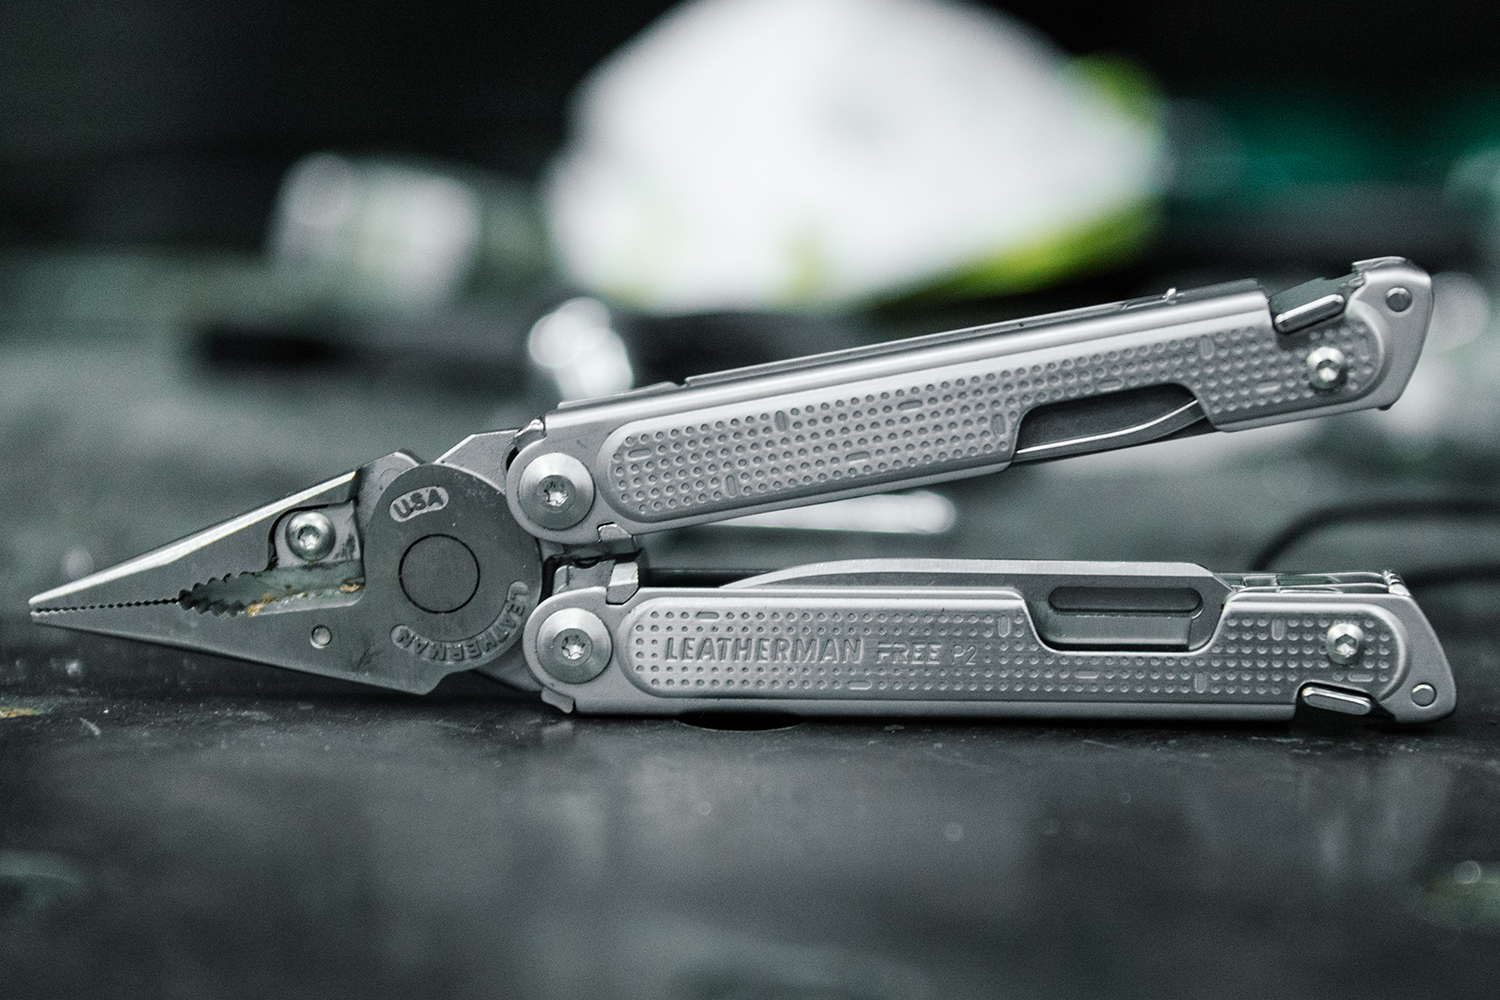 Review: How Does the New Magnetic Leatherman Compare to Their Classic Multitools?